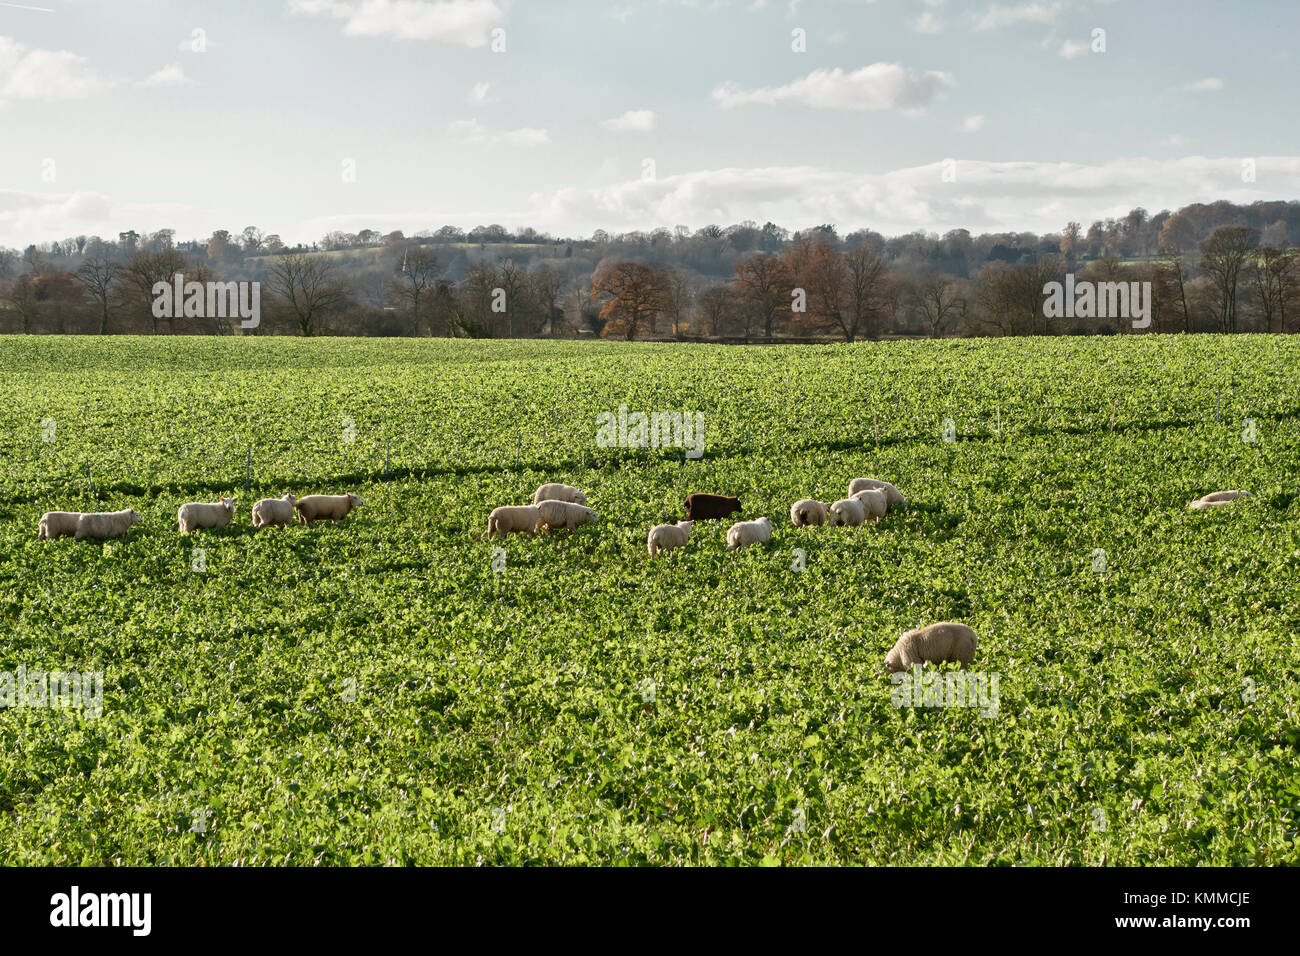 Herefordshire, UK. A field of sheep in winter grazing on sugar beet or fodder beet tops Stock Photo